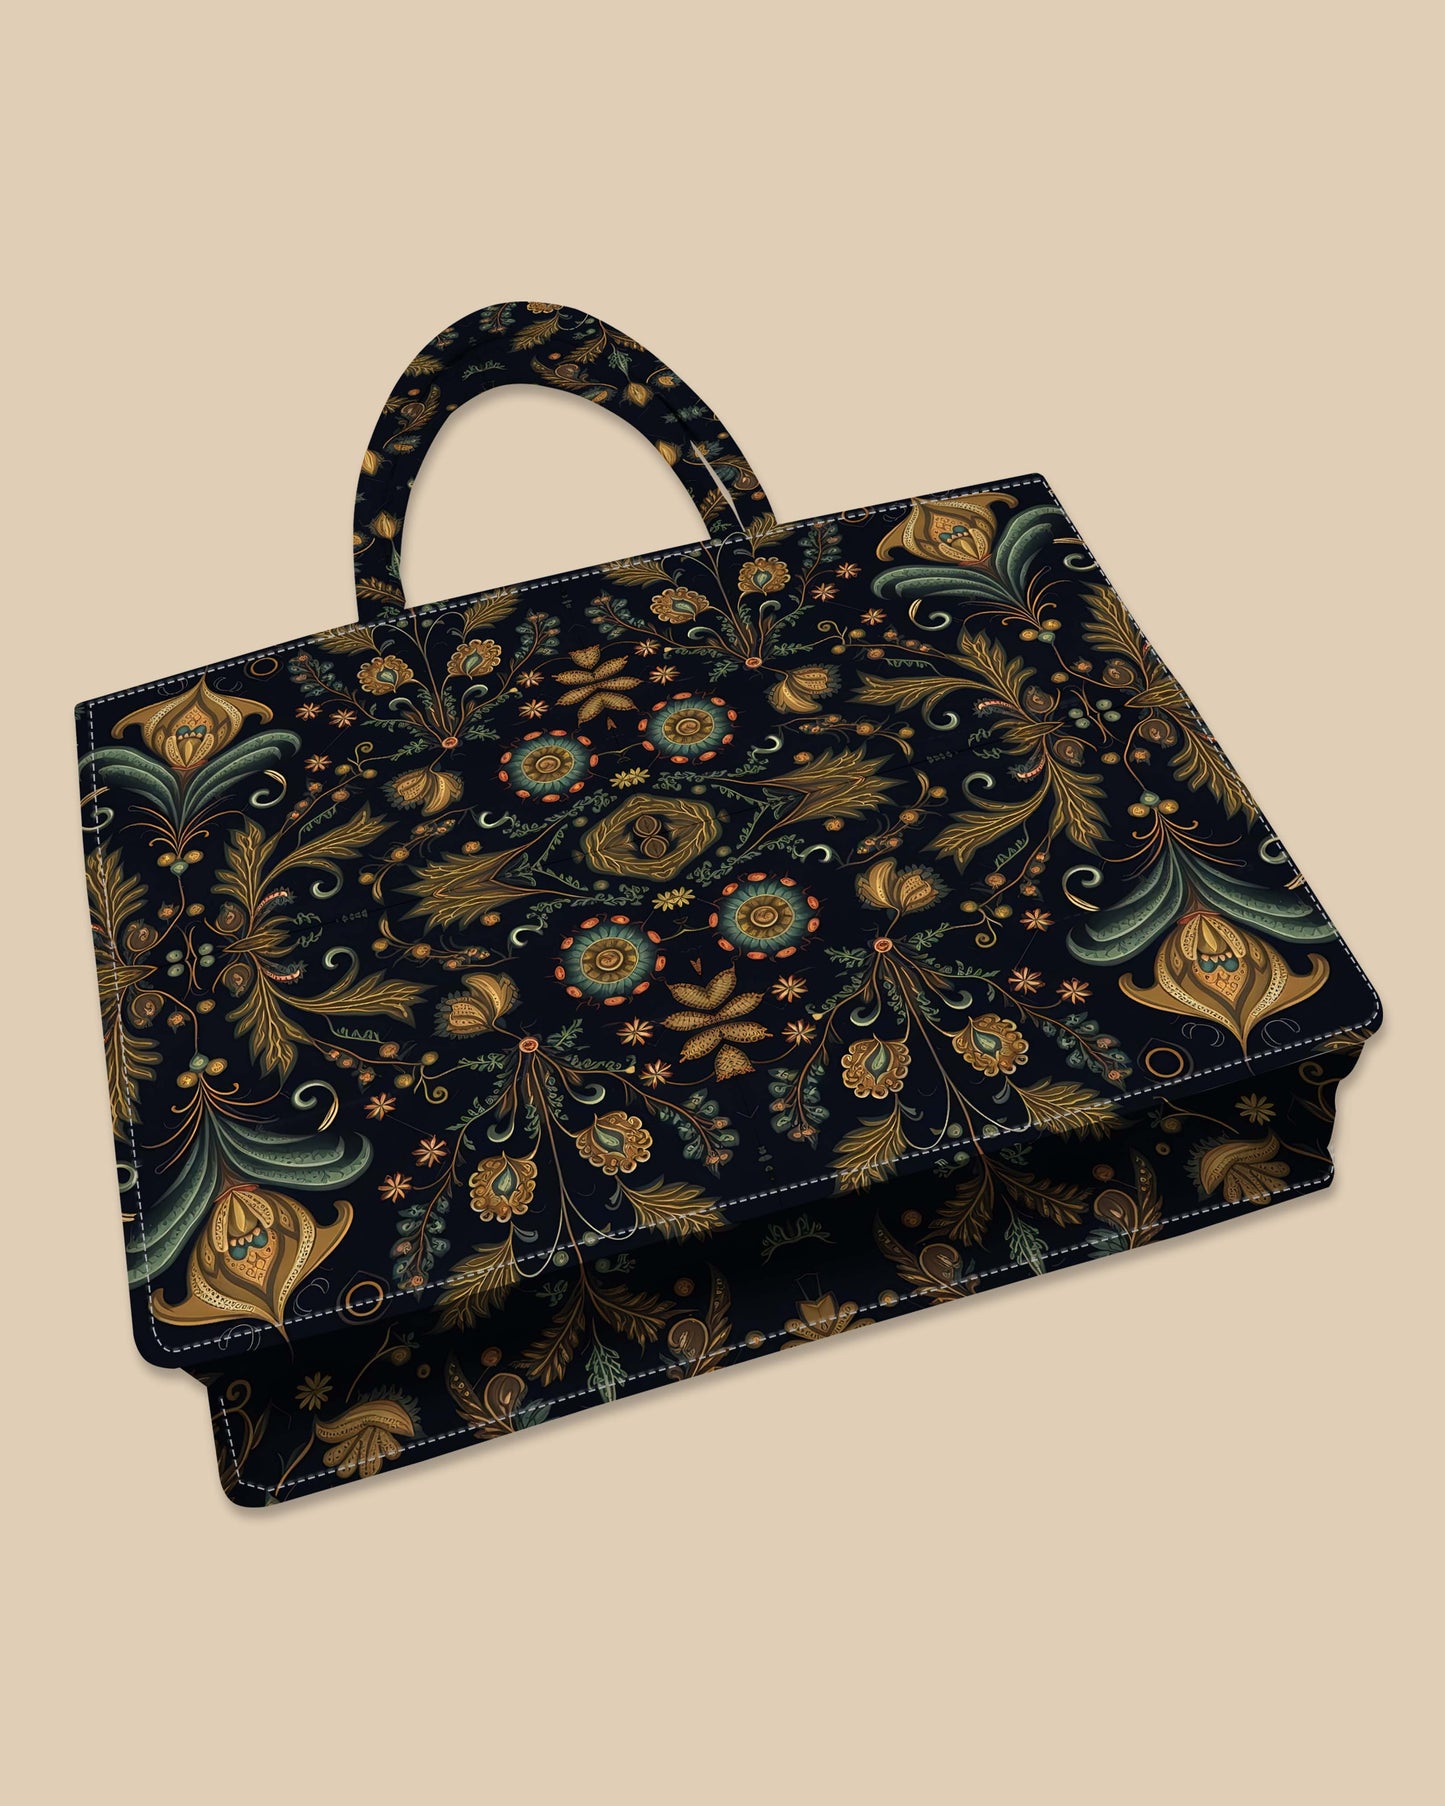 Tote Bag Designed with European Embossed Flowers